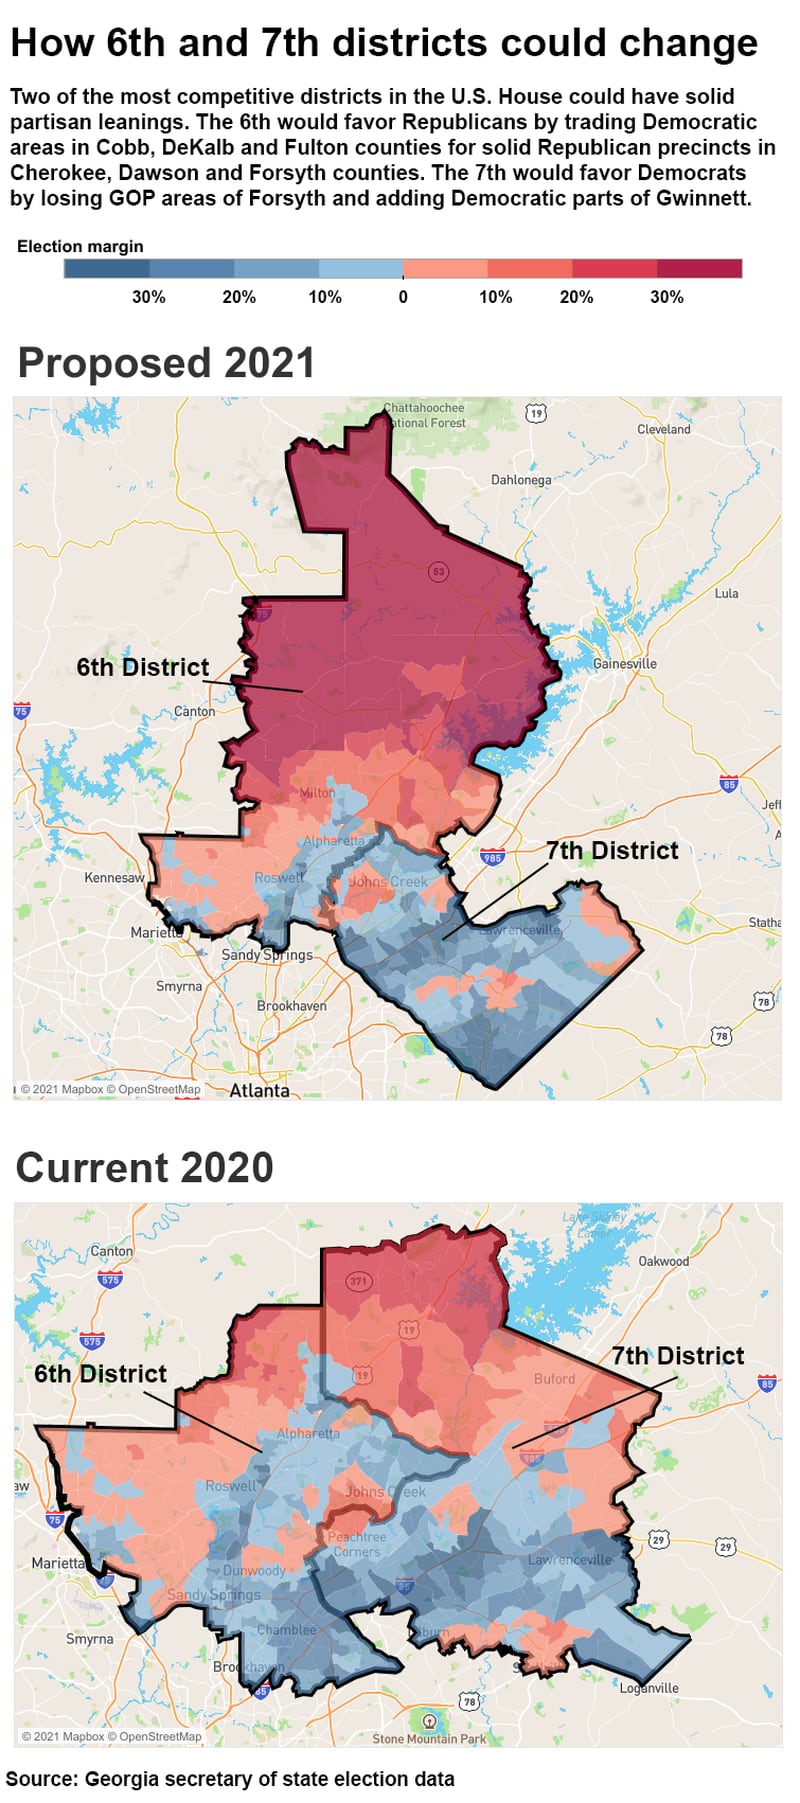 The 6th and 7th Congressional Districts could see significant changes according to a Republican proposal.